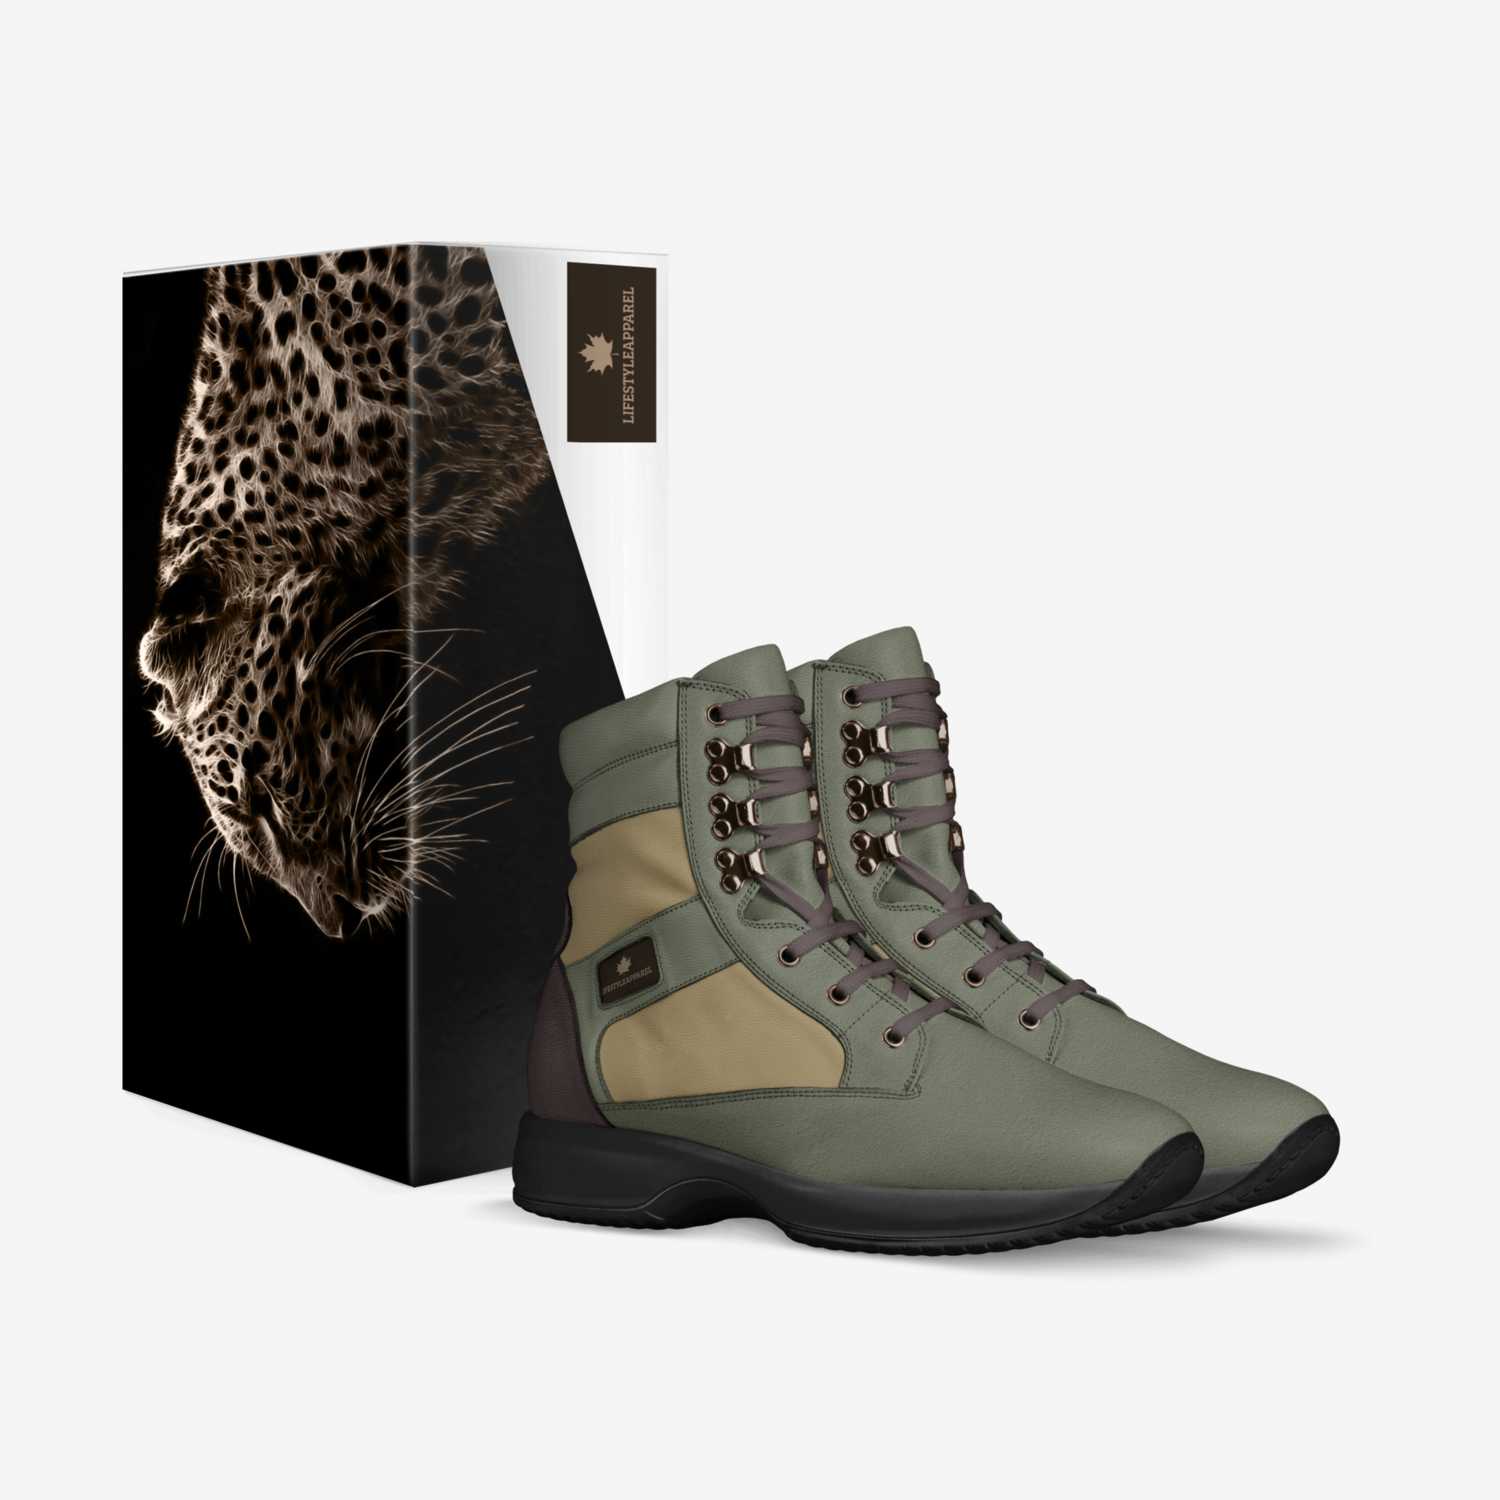 LIFESTYLEAPPAREL custom made in Italy shoes by Ramsey Shepherd | Box view